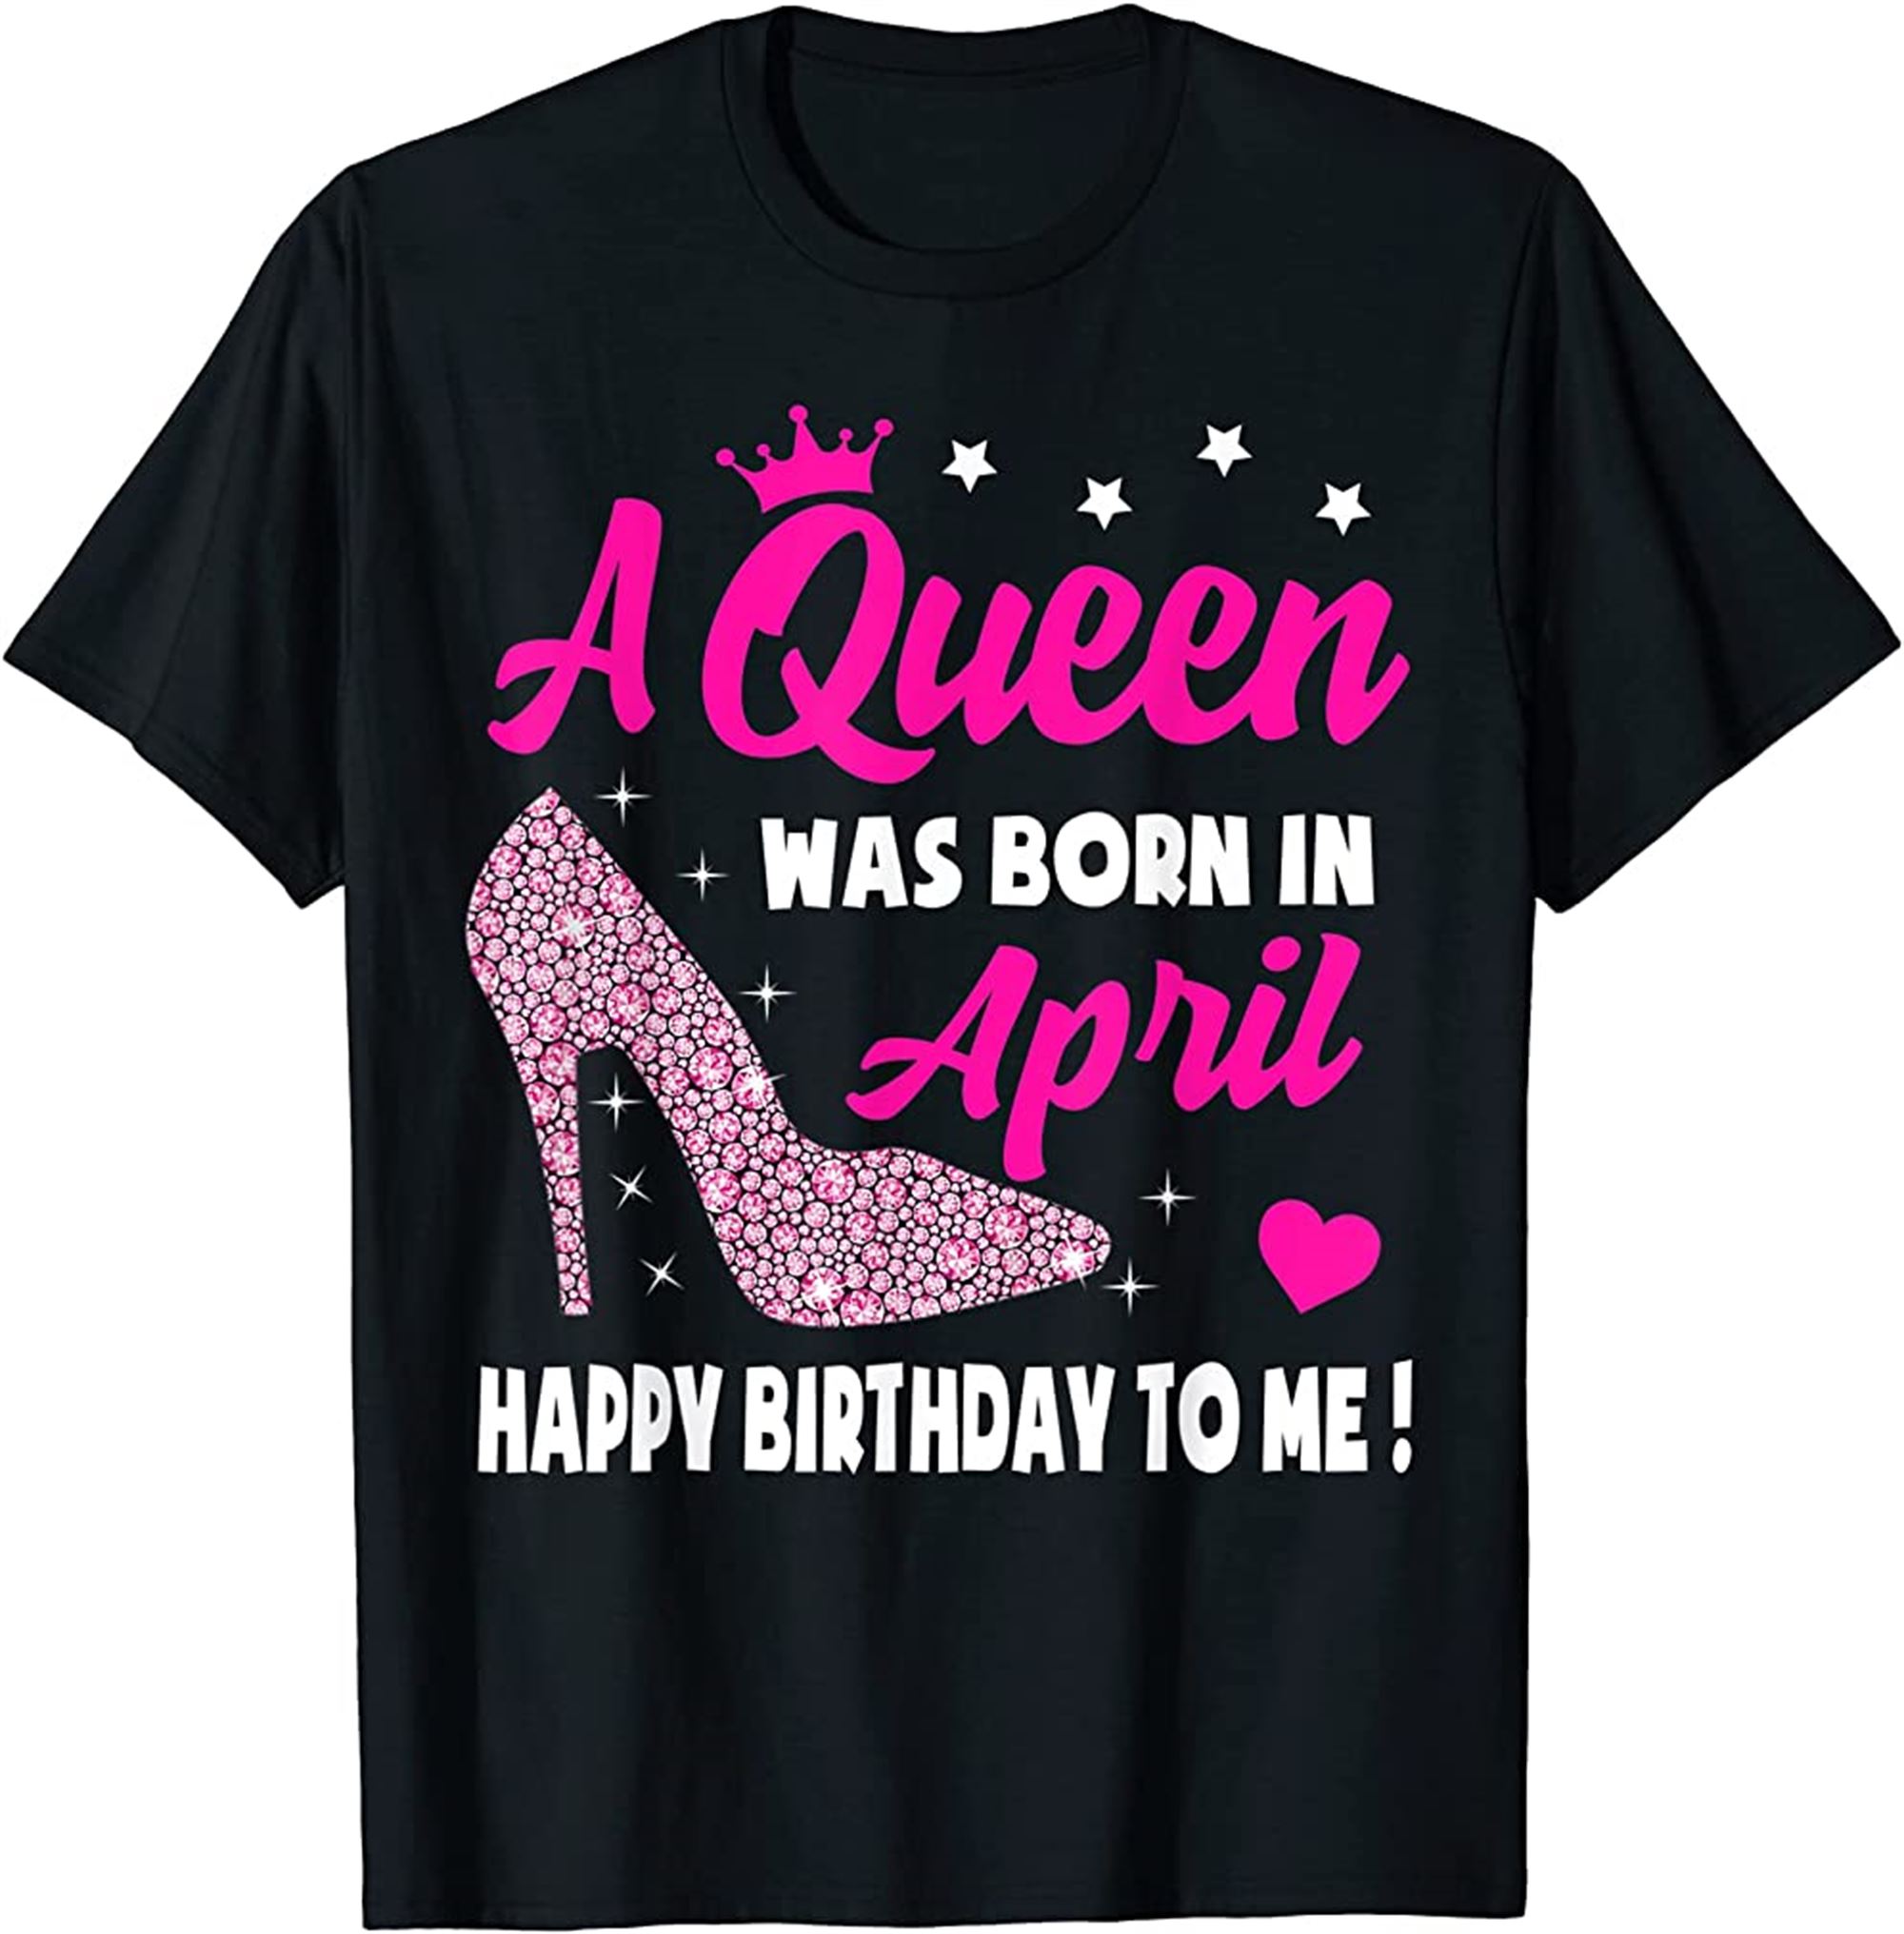 April Birthday Shirts For Women Girls Queen Born In April T-shirt Plus Size Up To 5xl